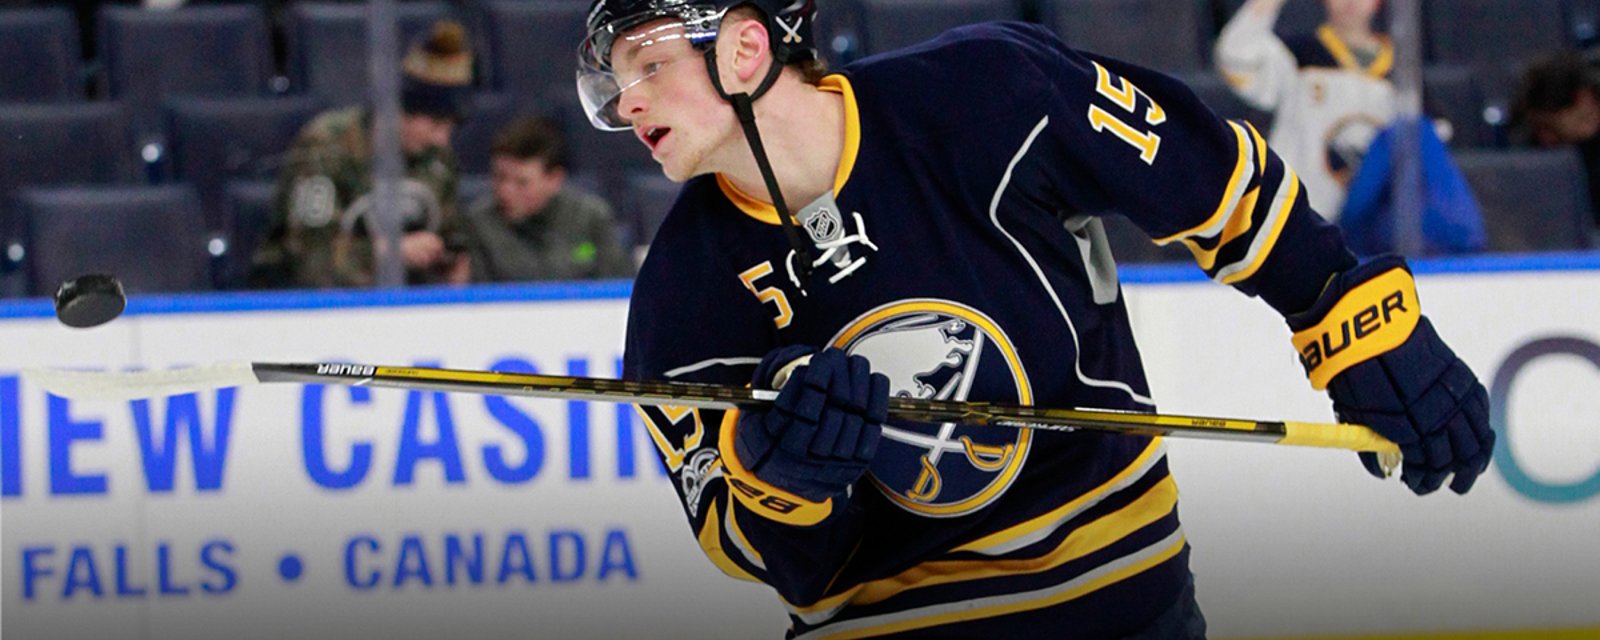 Eichel slams his own team on first day of camp! 